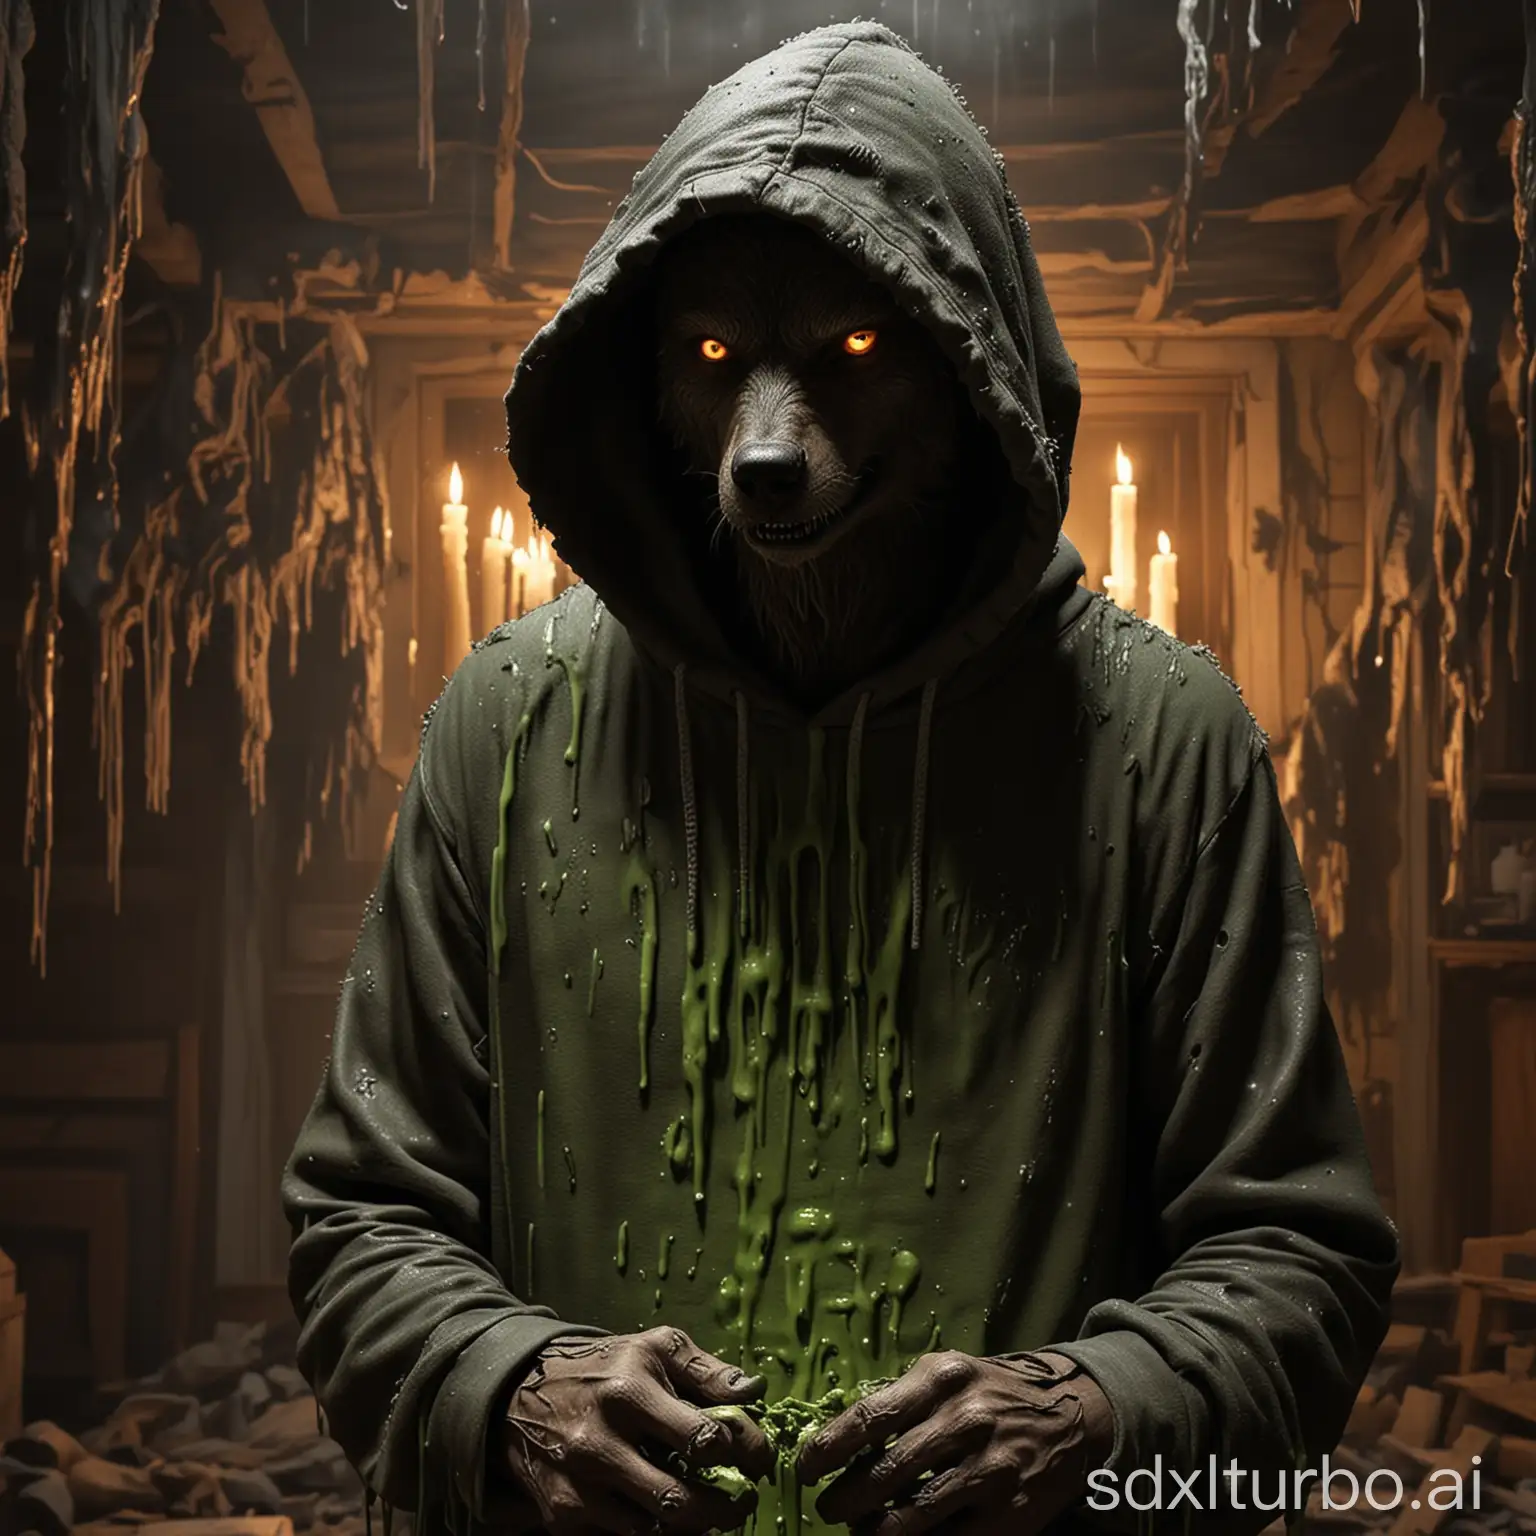 wolf with body of men, hoddie, house destroyed interior, scary, slime, candlelight, detail half body, realistic